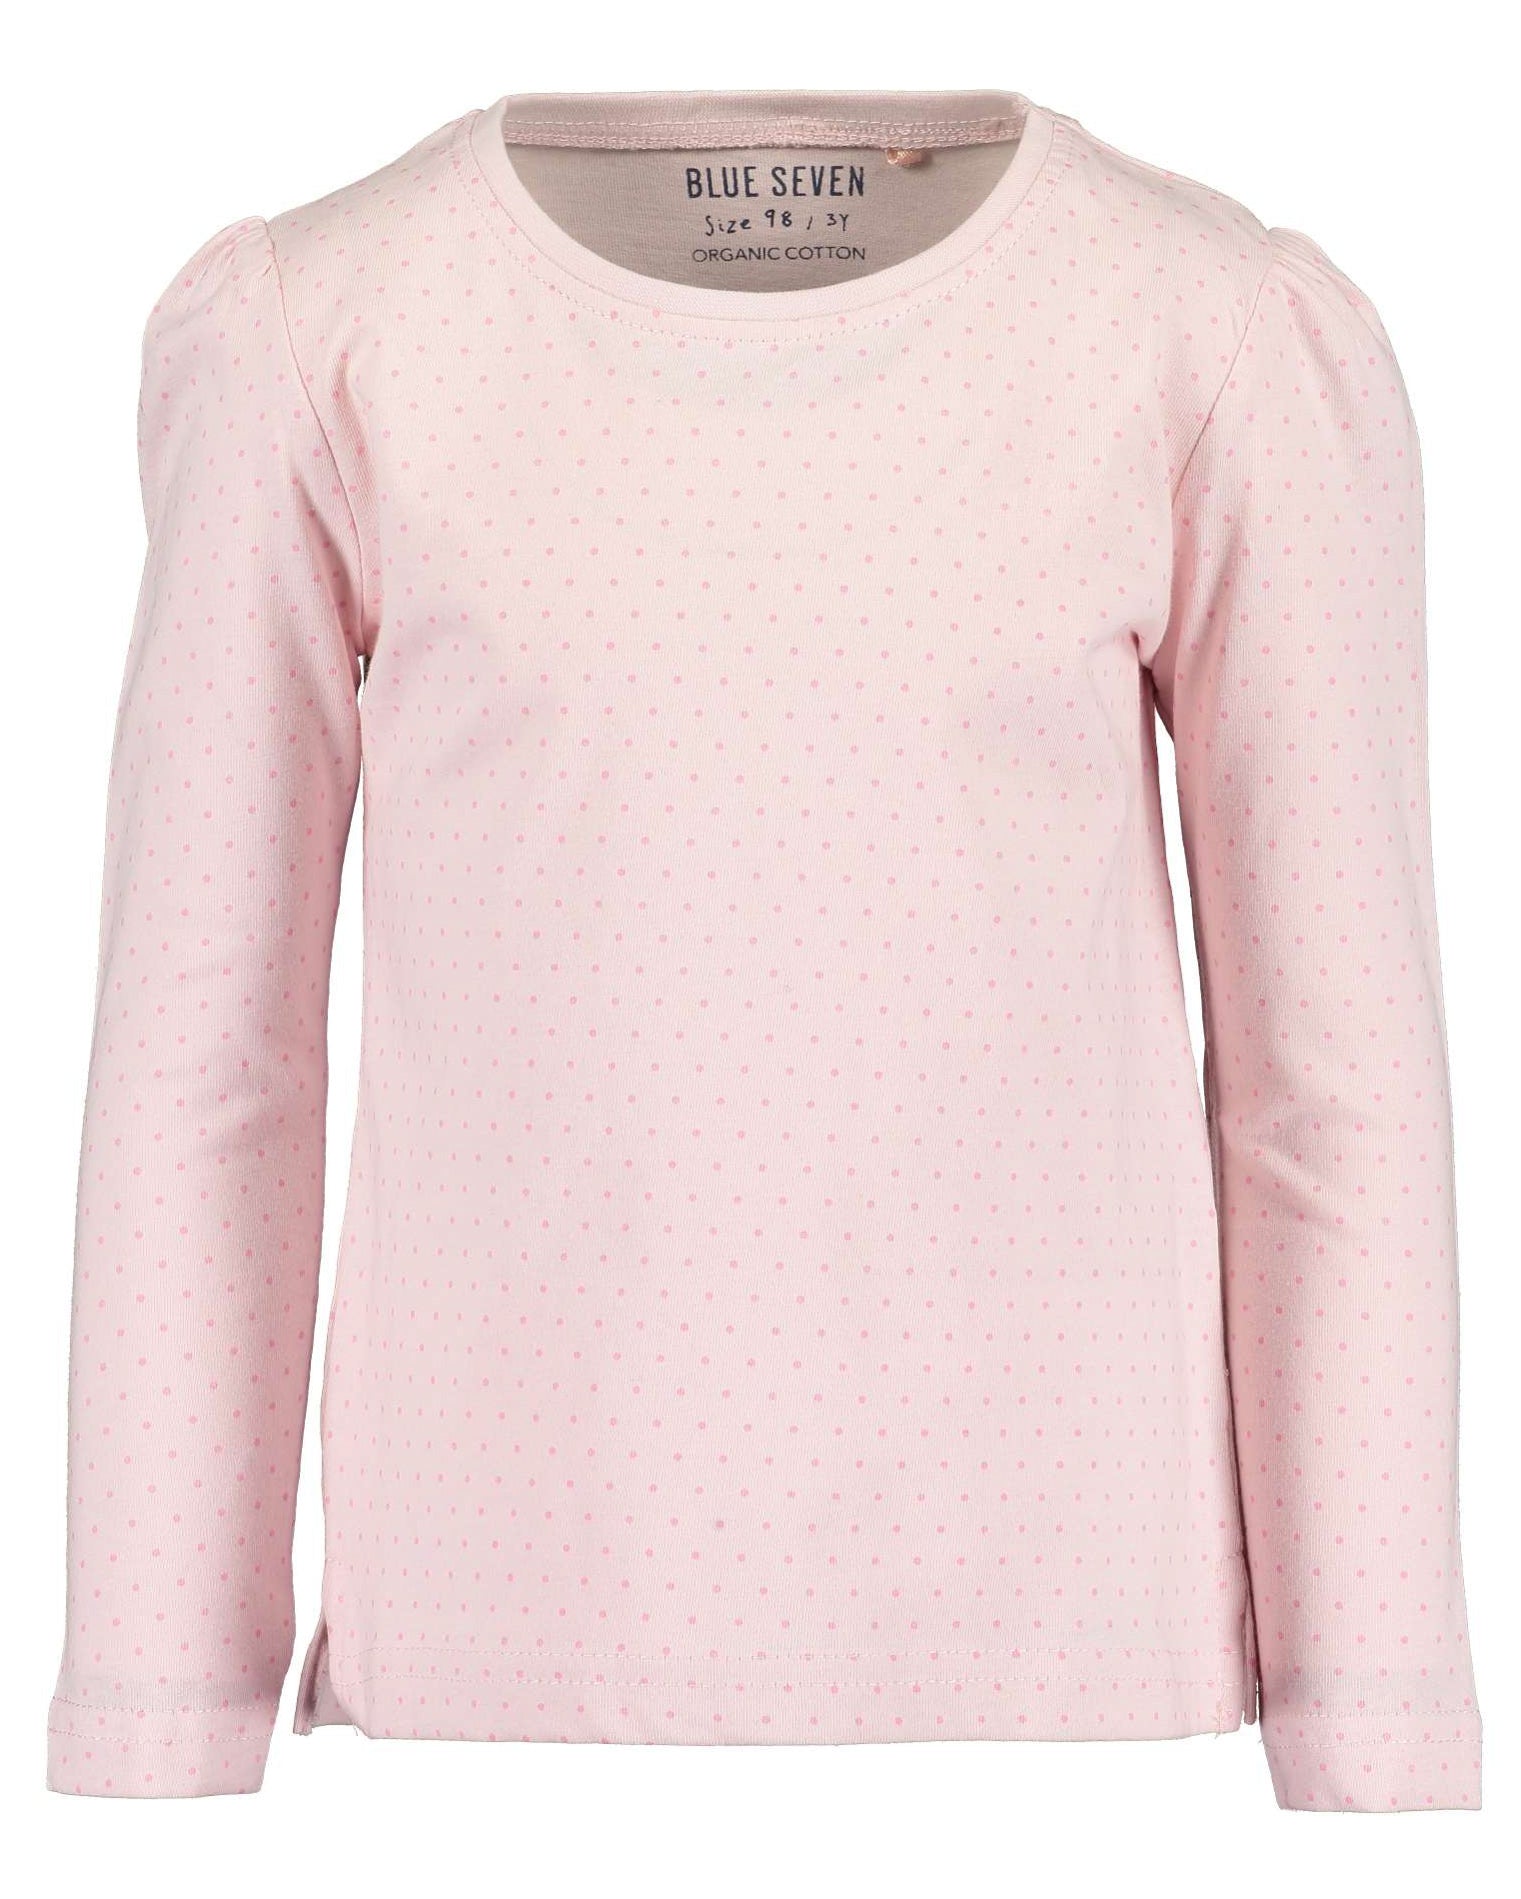 Girls Pink Spotted T Shirt - Nana B Baby & Childrenswear Boutique